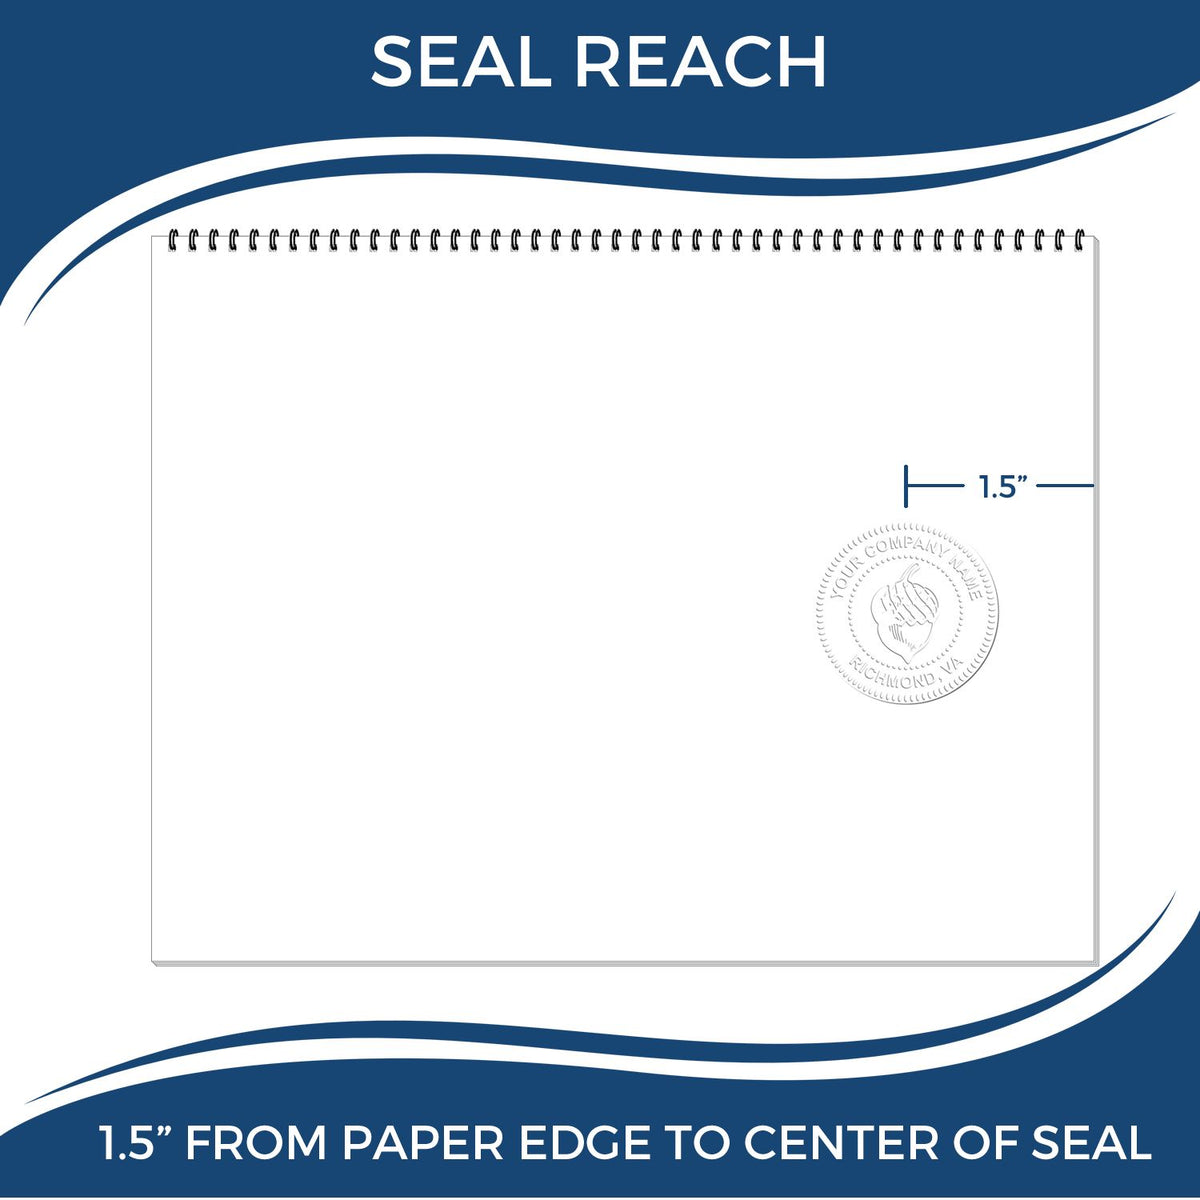 An infographic showing the seal reach which is represented by a ruler and a miniature seal image of the State of Mississippi Soft Land Surveyor Embossing Seal